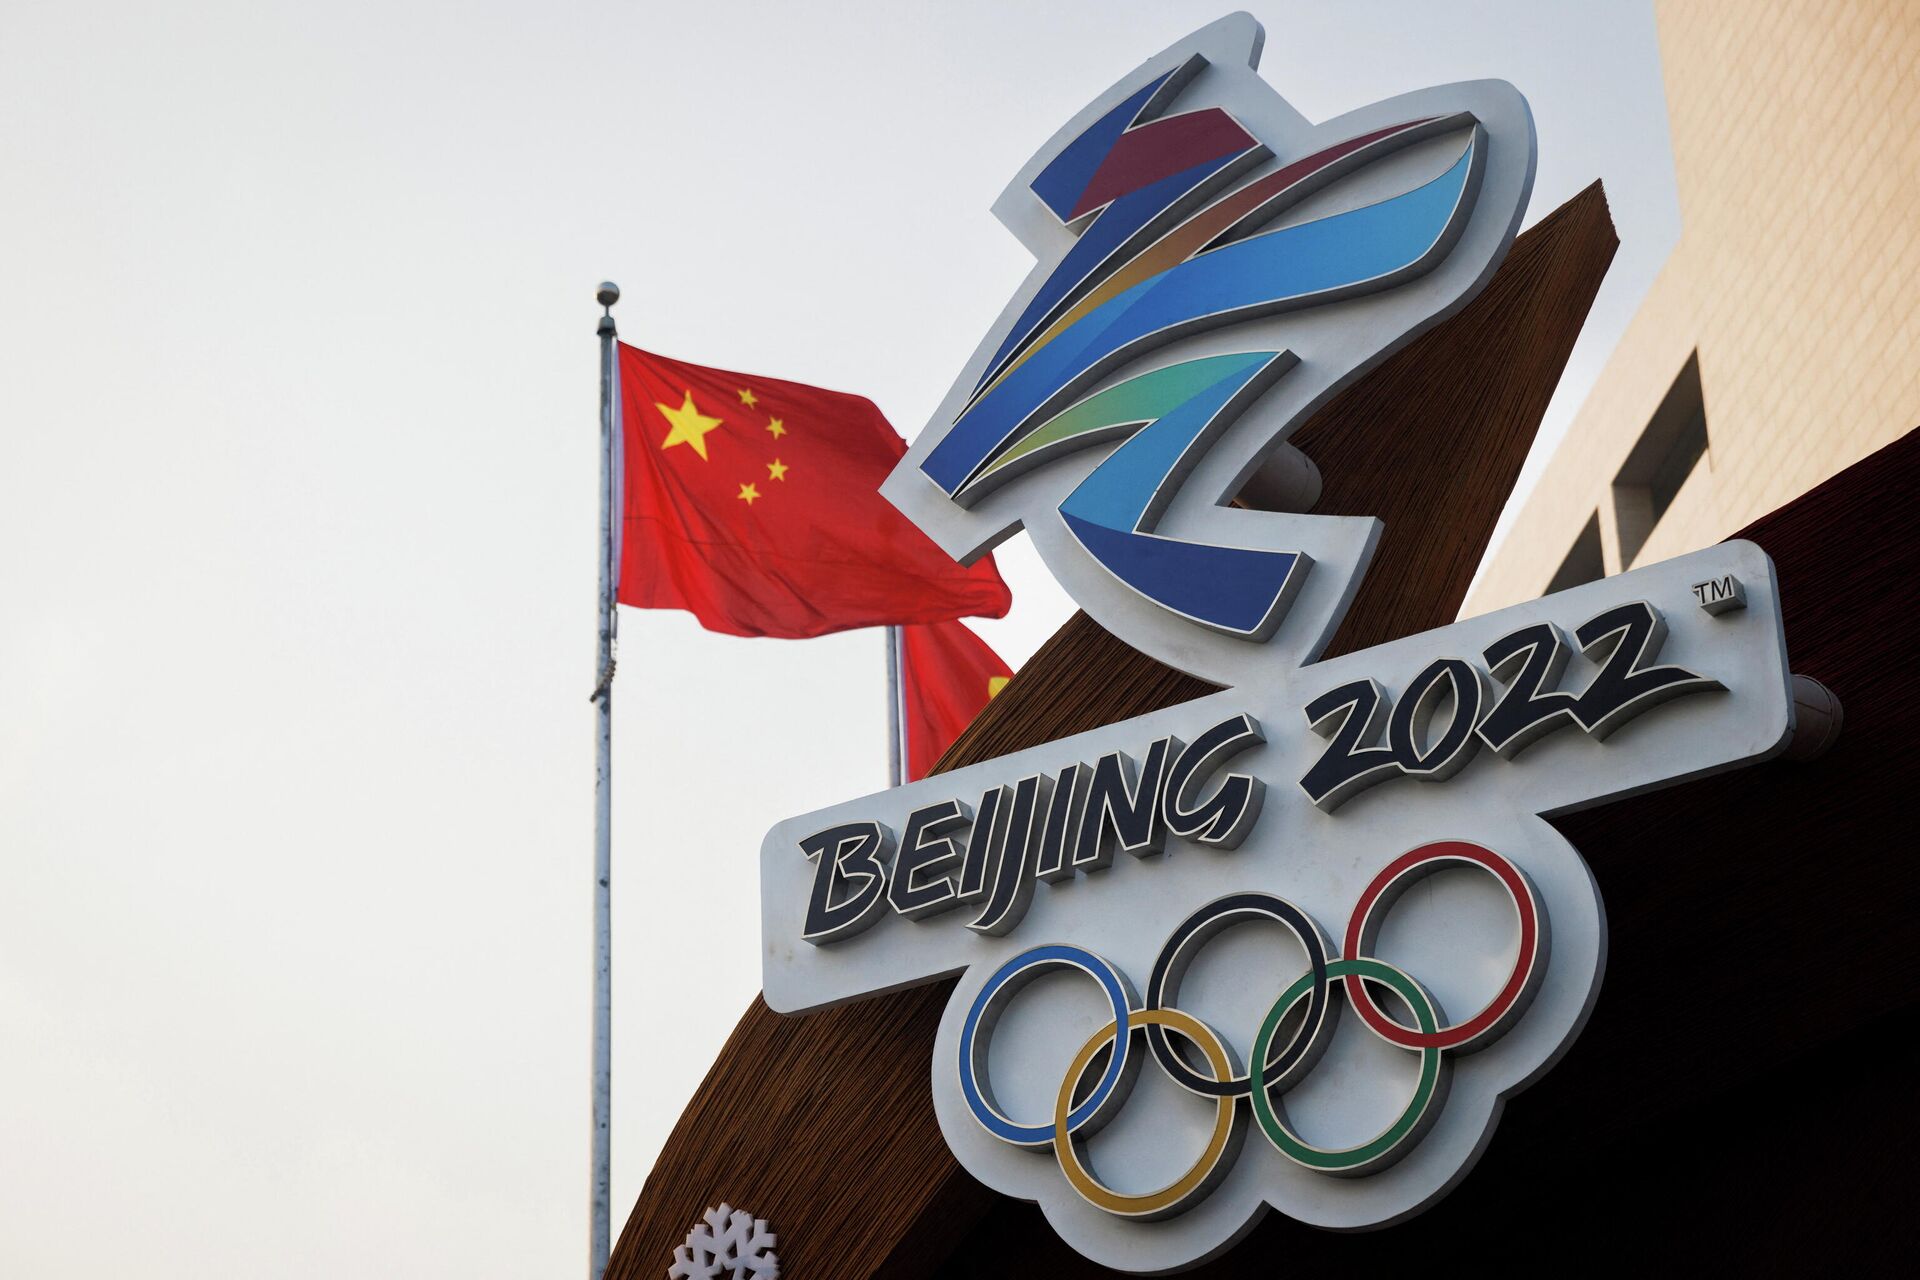 The Chinese national flag flies behind the logo of the Beijing 2022 Winter Olympics in Beijing, China, January 14, 2022 - Sputnik International, 1920, 03.02.2022